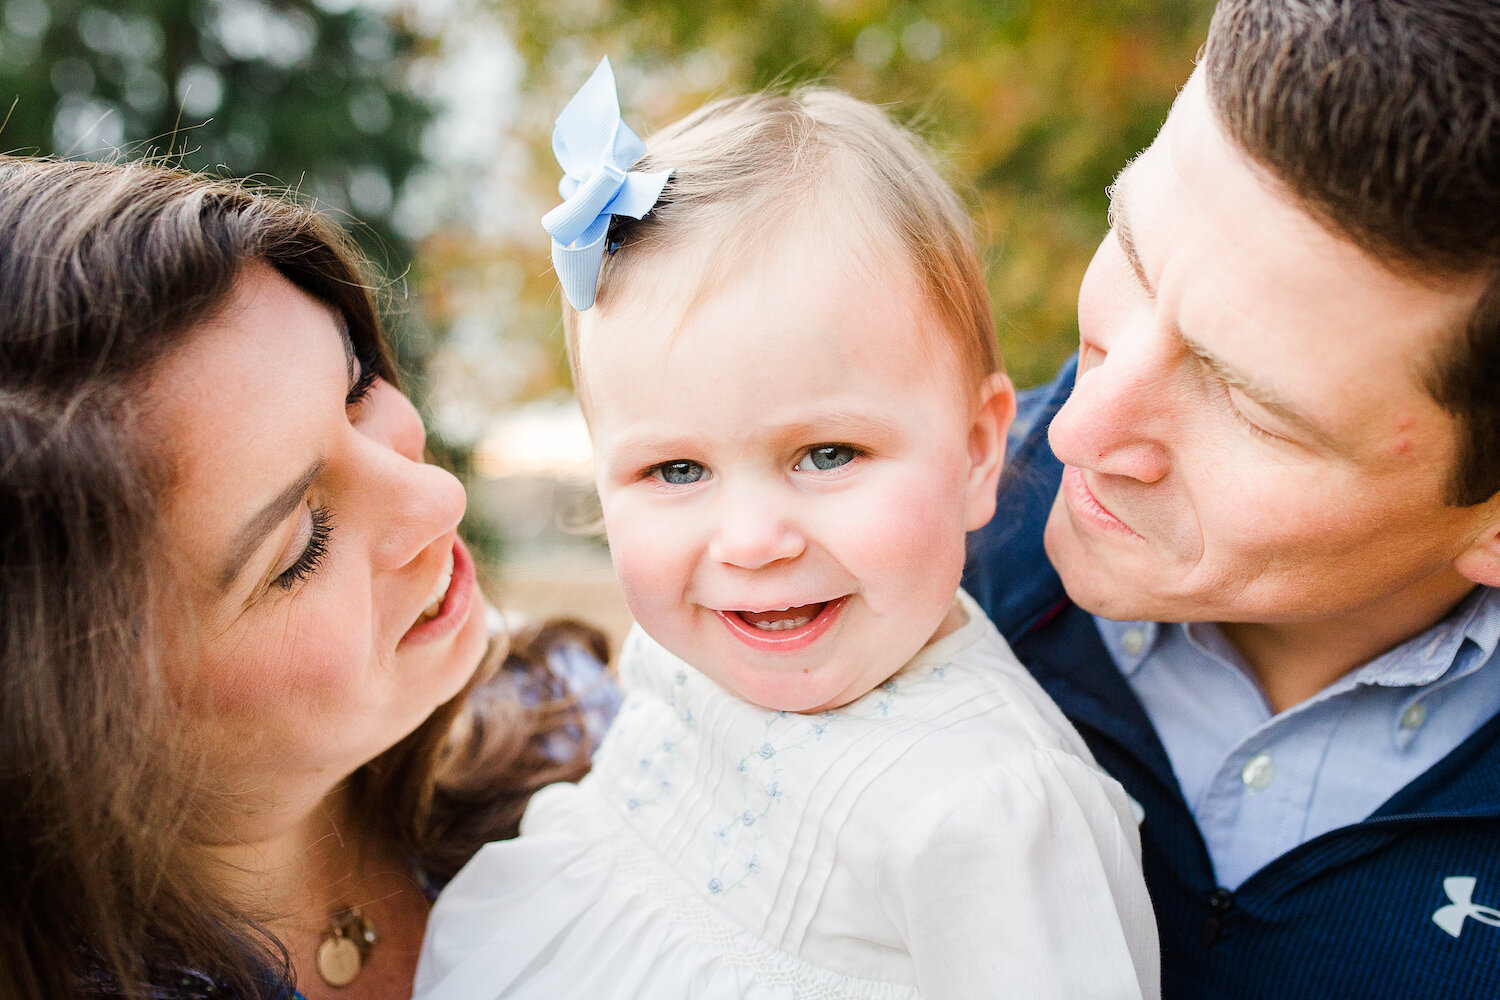 parents smile at baby daughter wearing blue bow